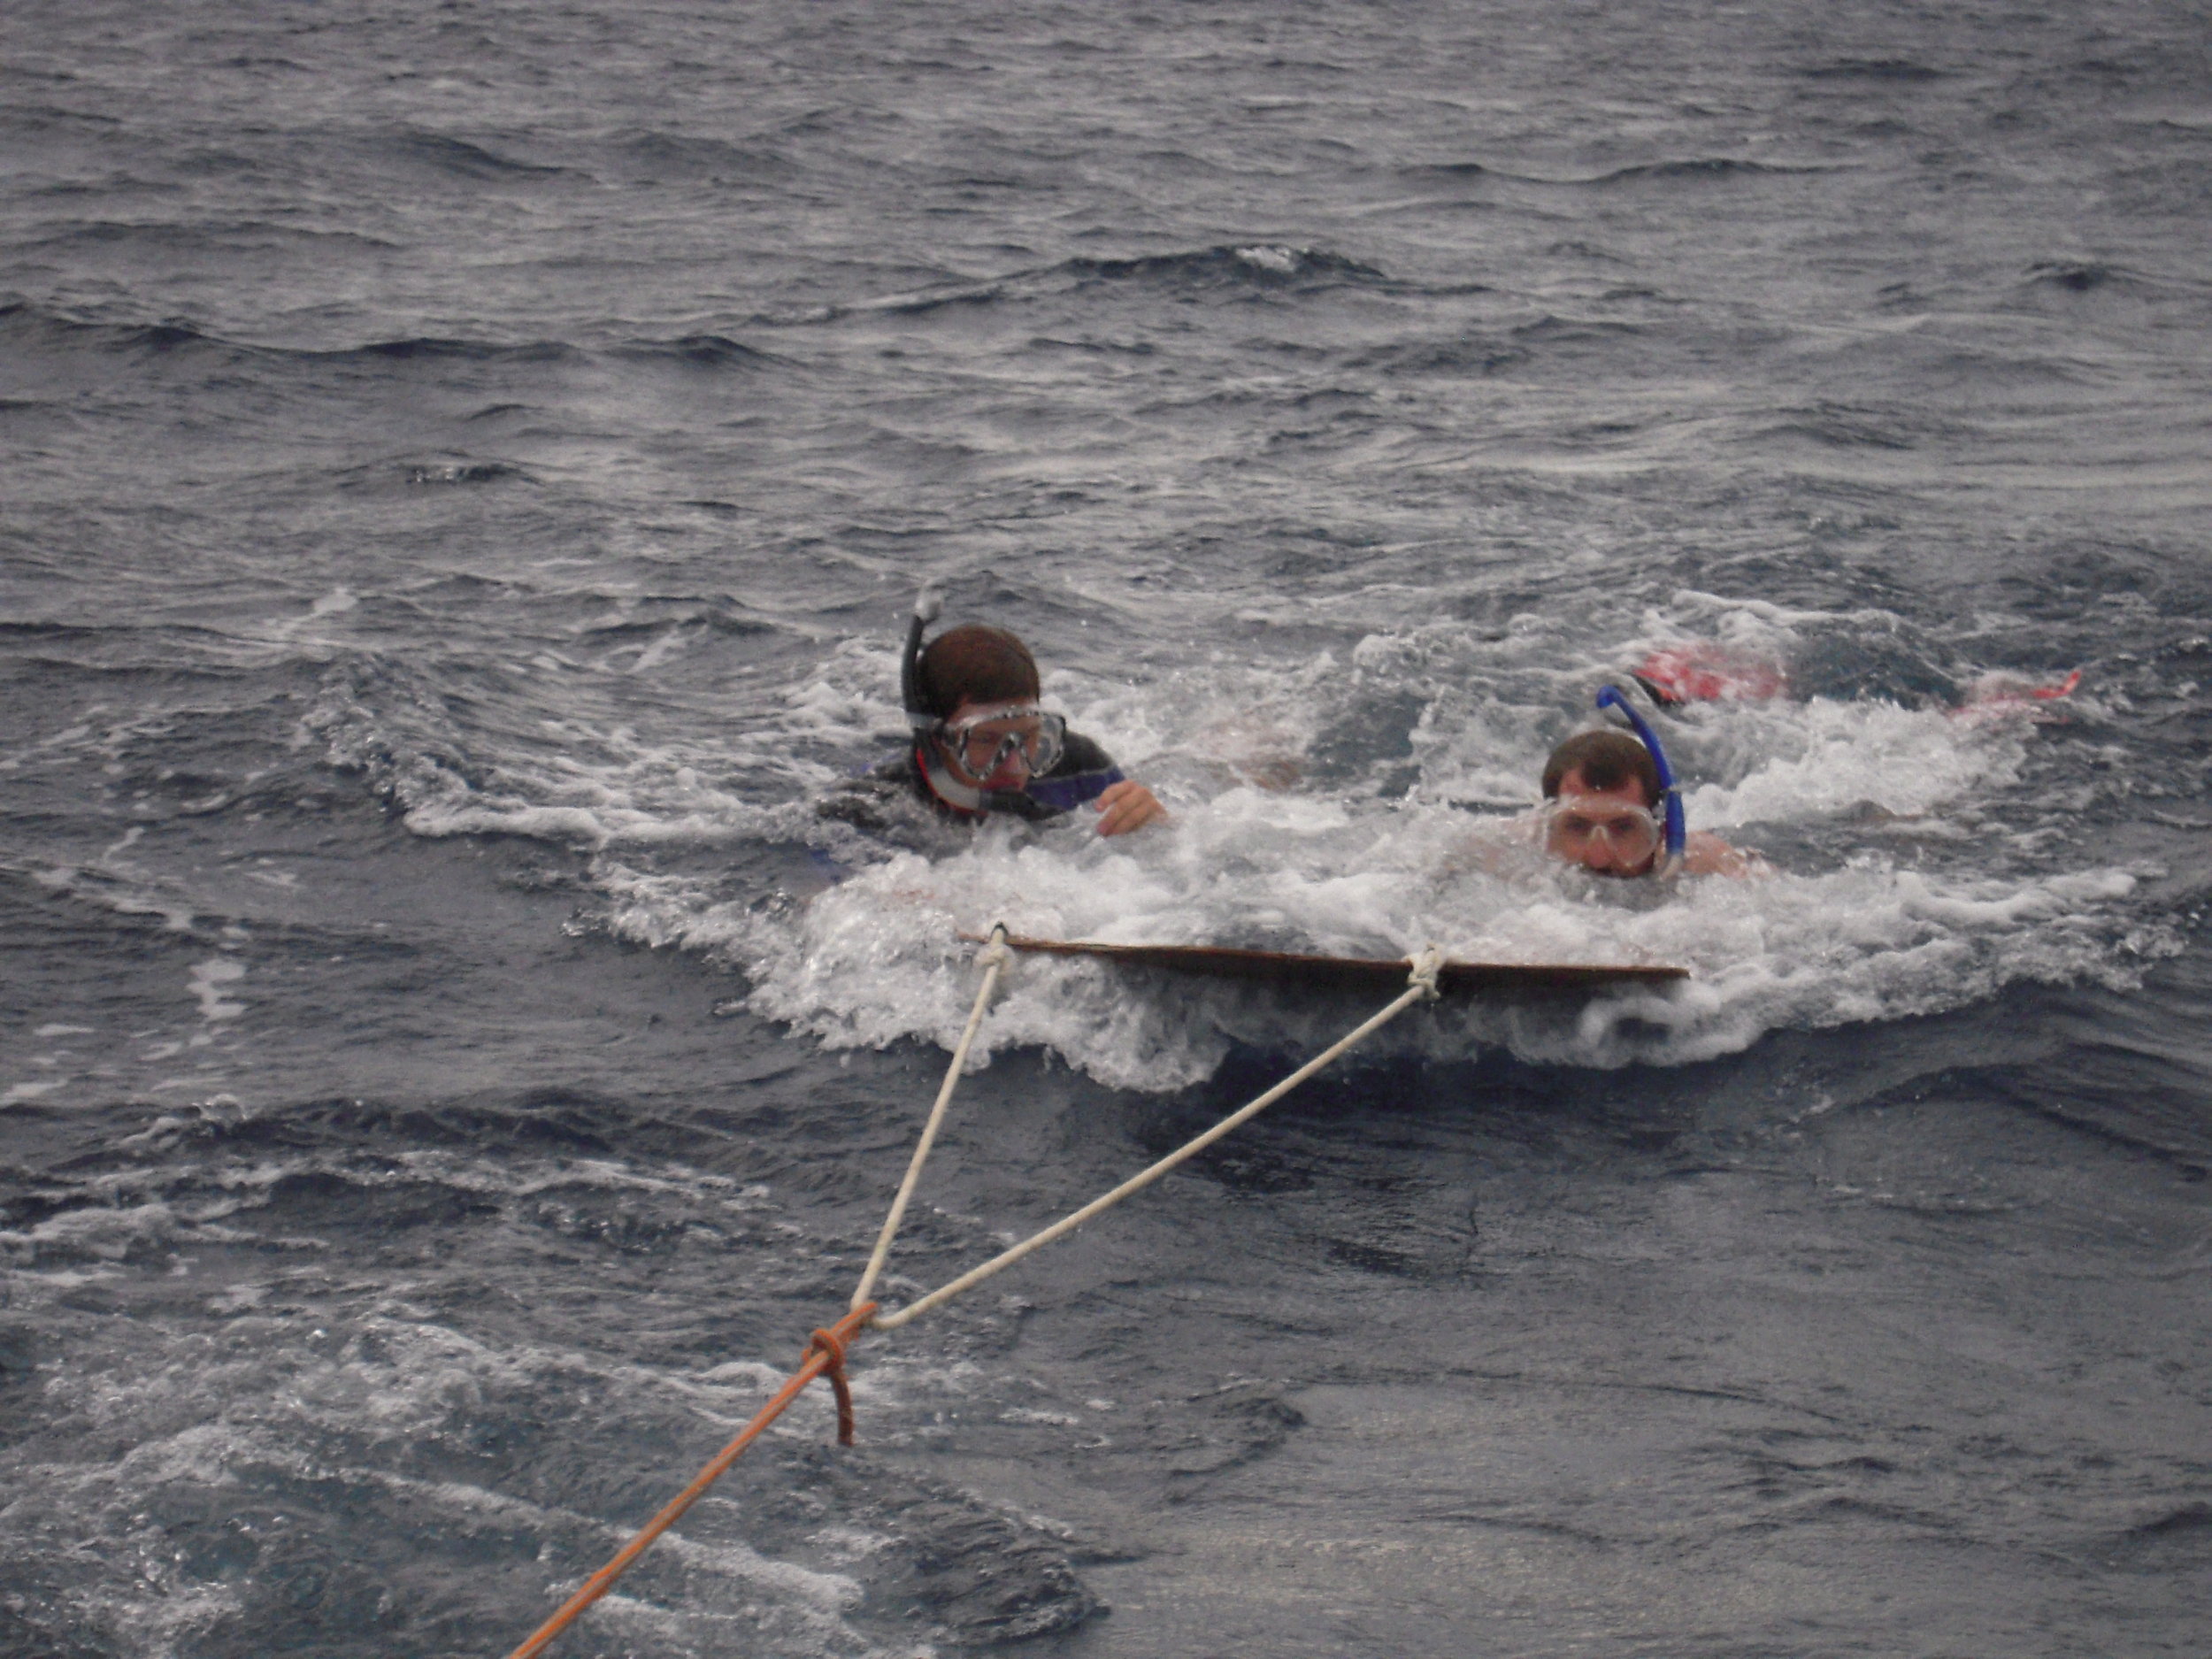 Students test out the Manta Tow during a search for aggregate grouper spawning site with Sustainable Fisheries